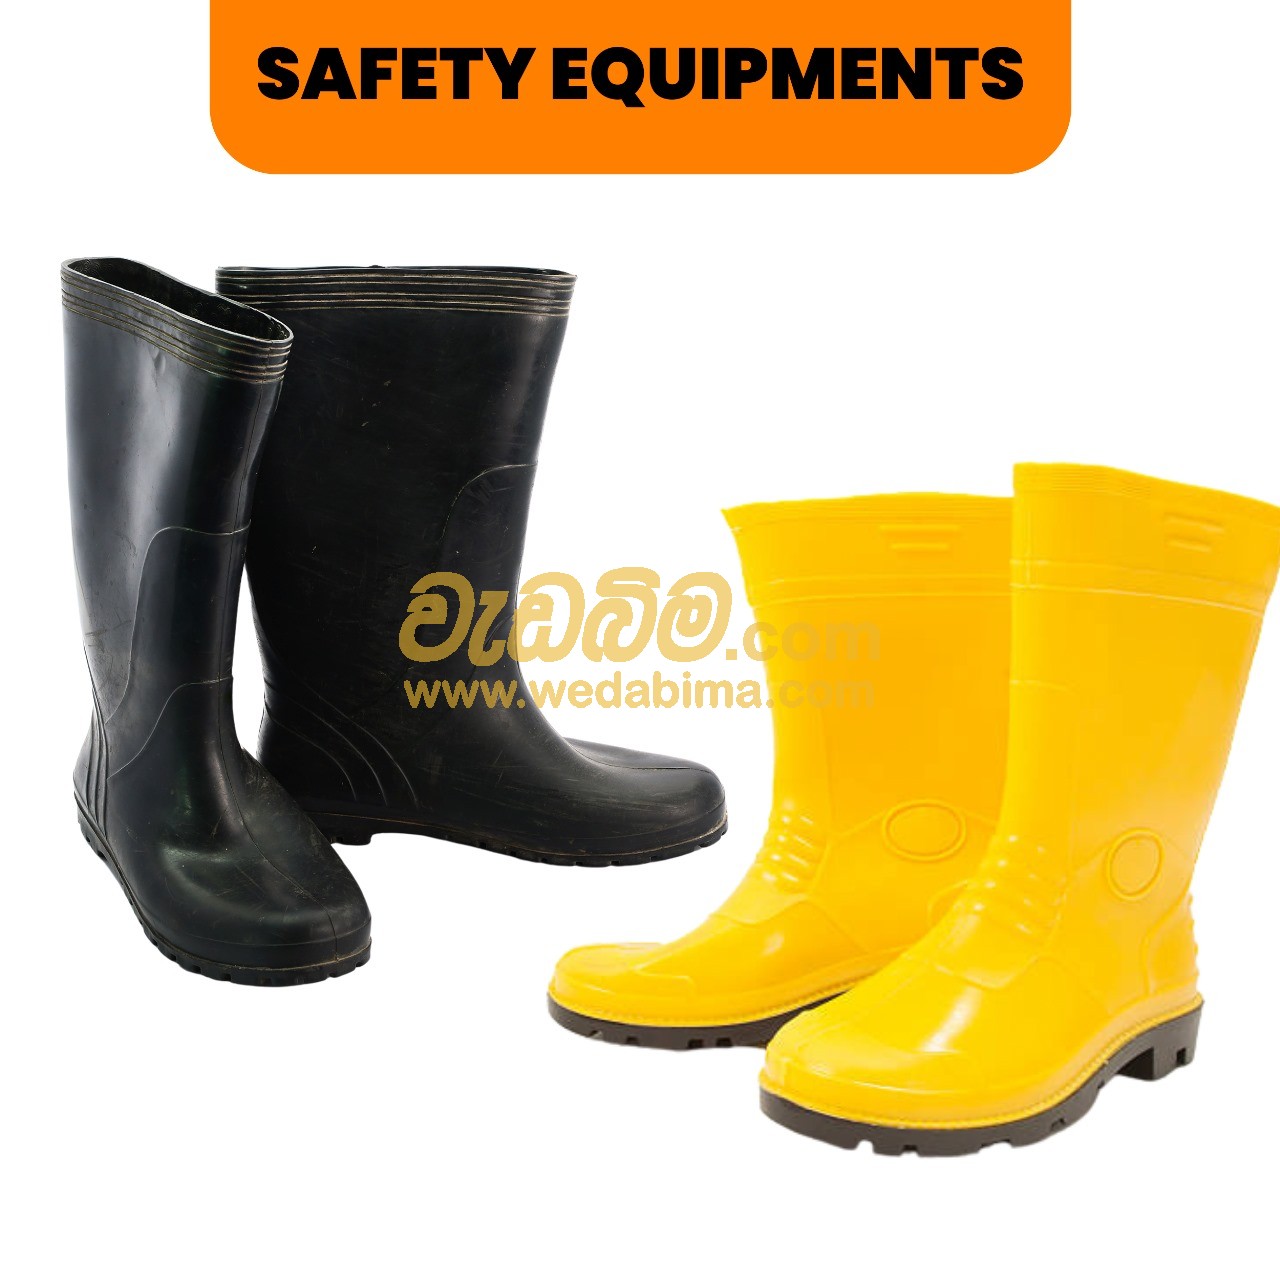 Safety Boots and Shoes Suppliers in Sri Lanka